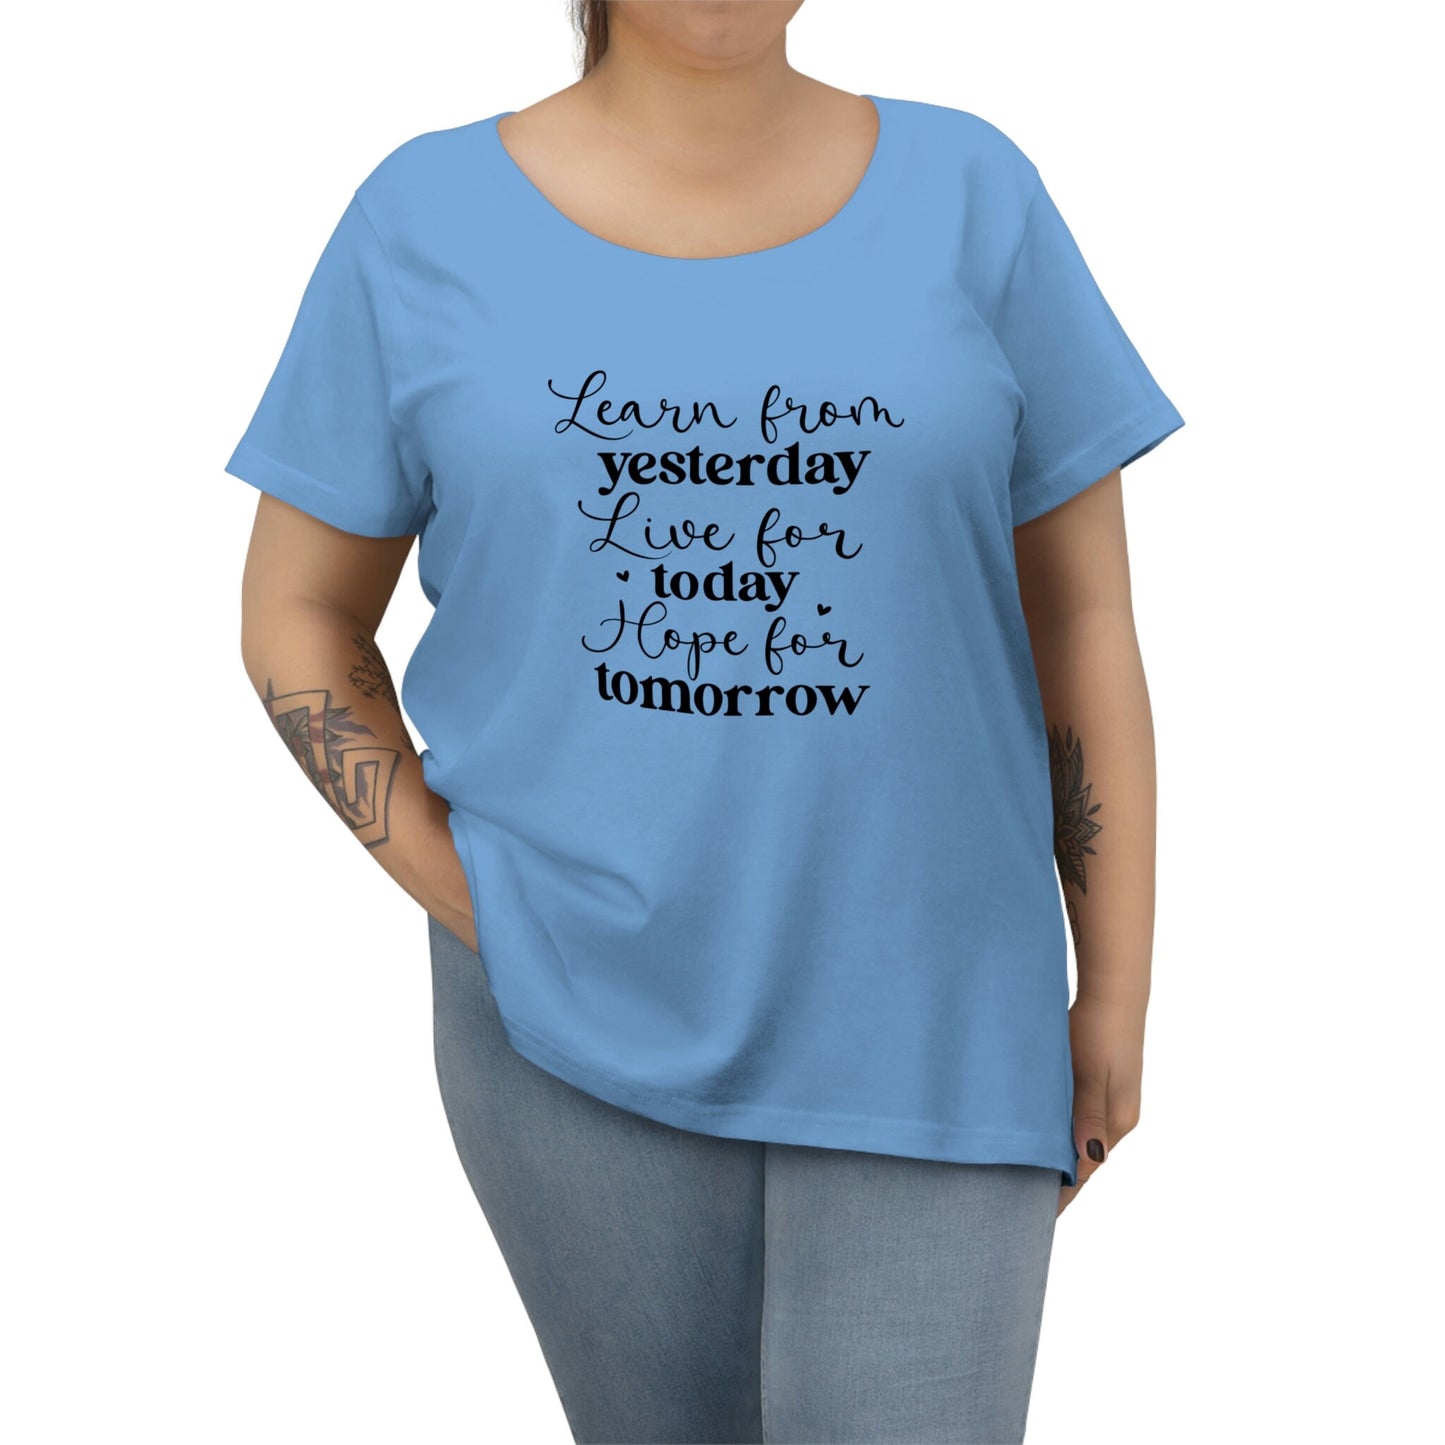 Learn from Yesterday, Live for Today, Hope for Tomorrow - Women's Curvy Tee